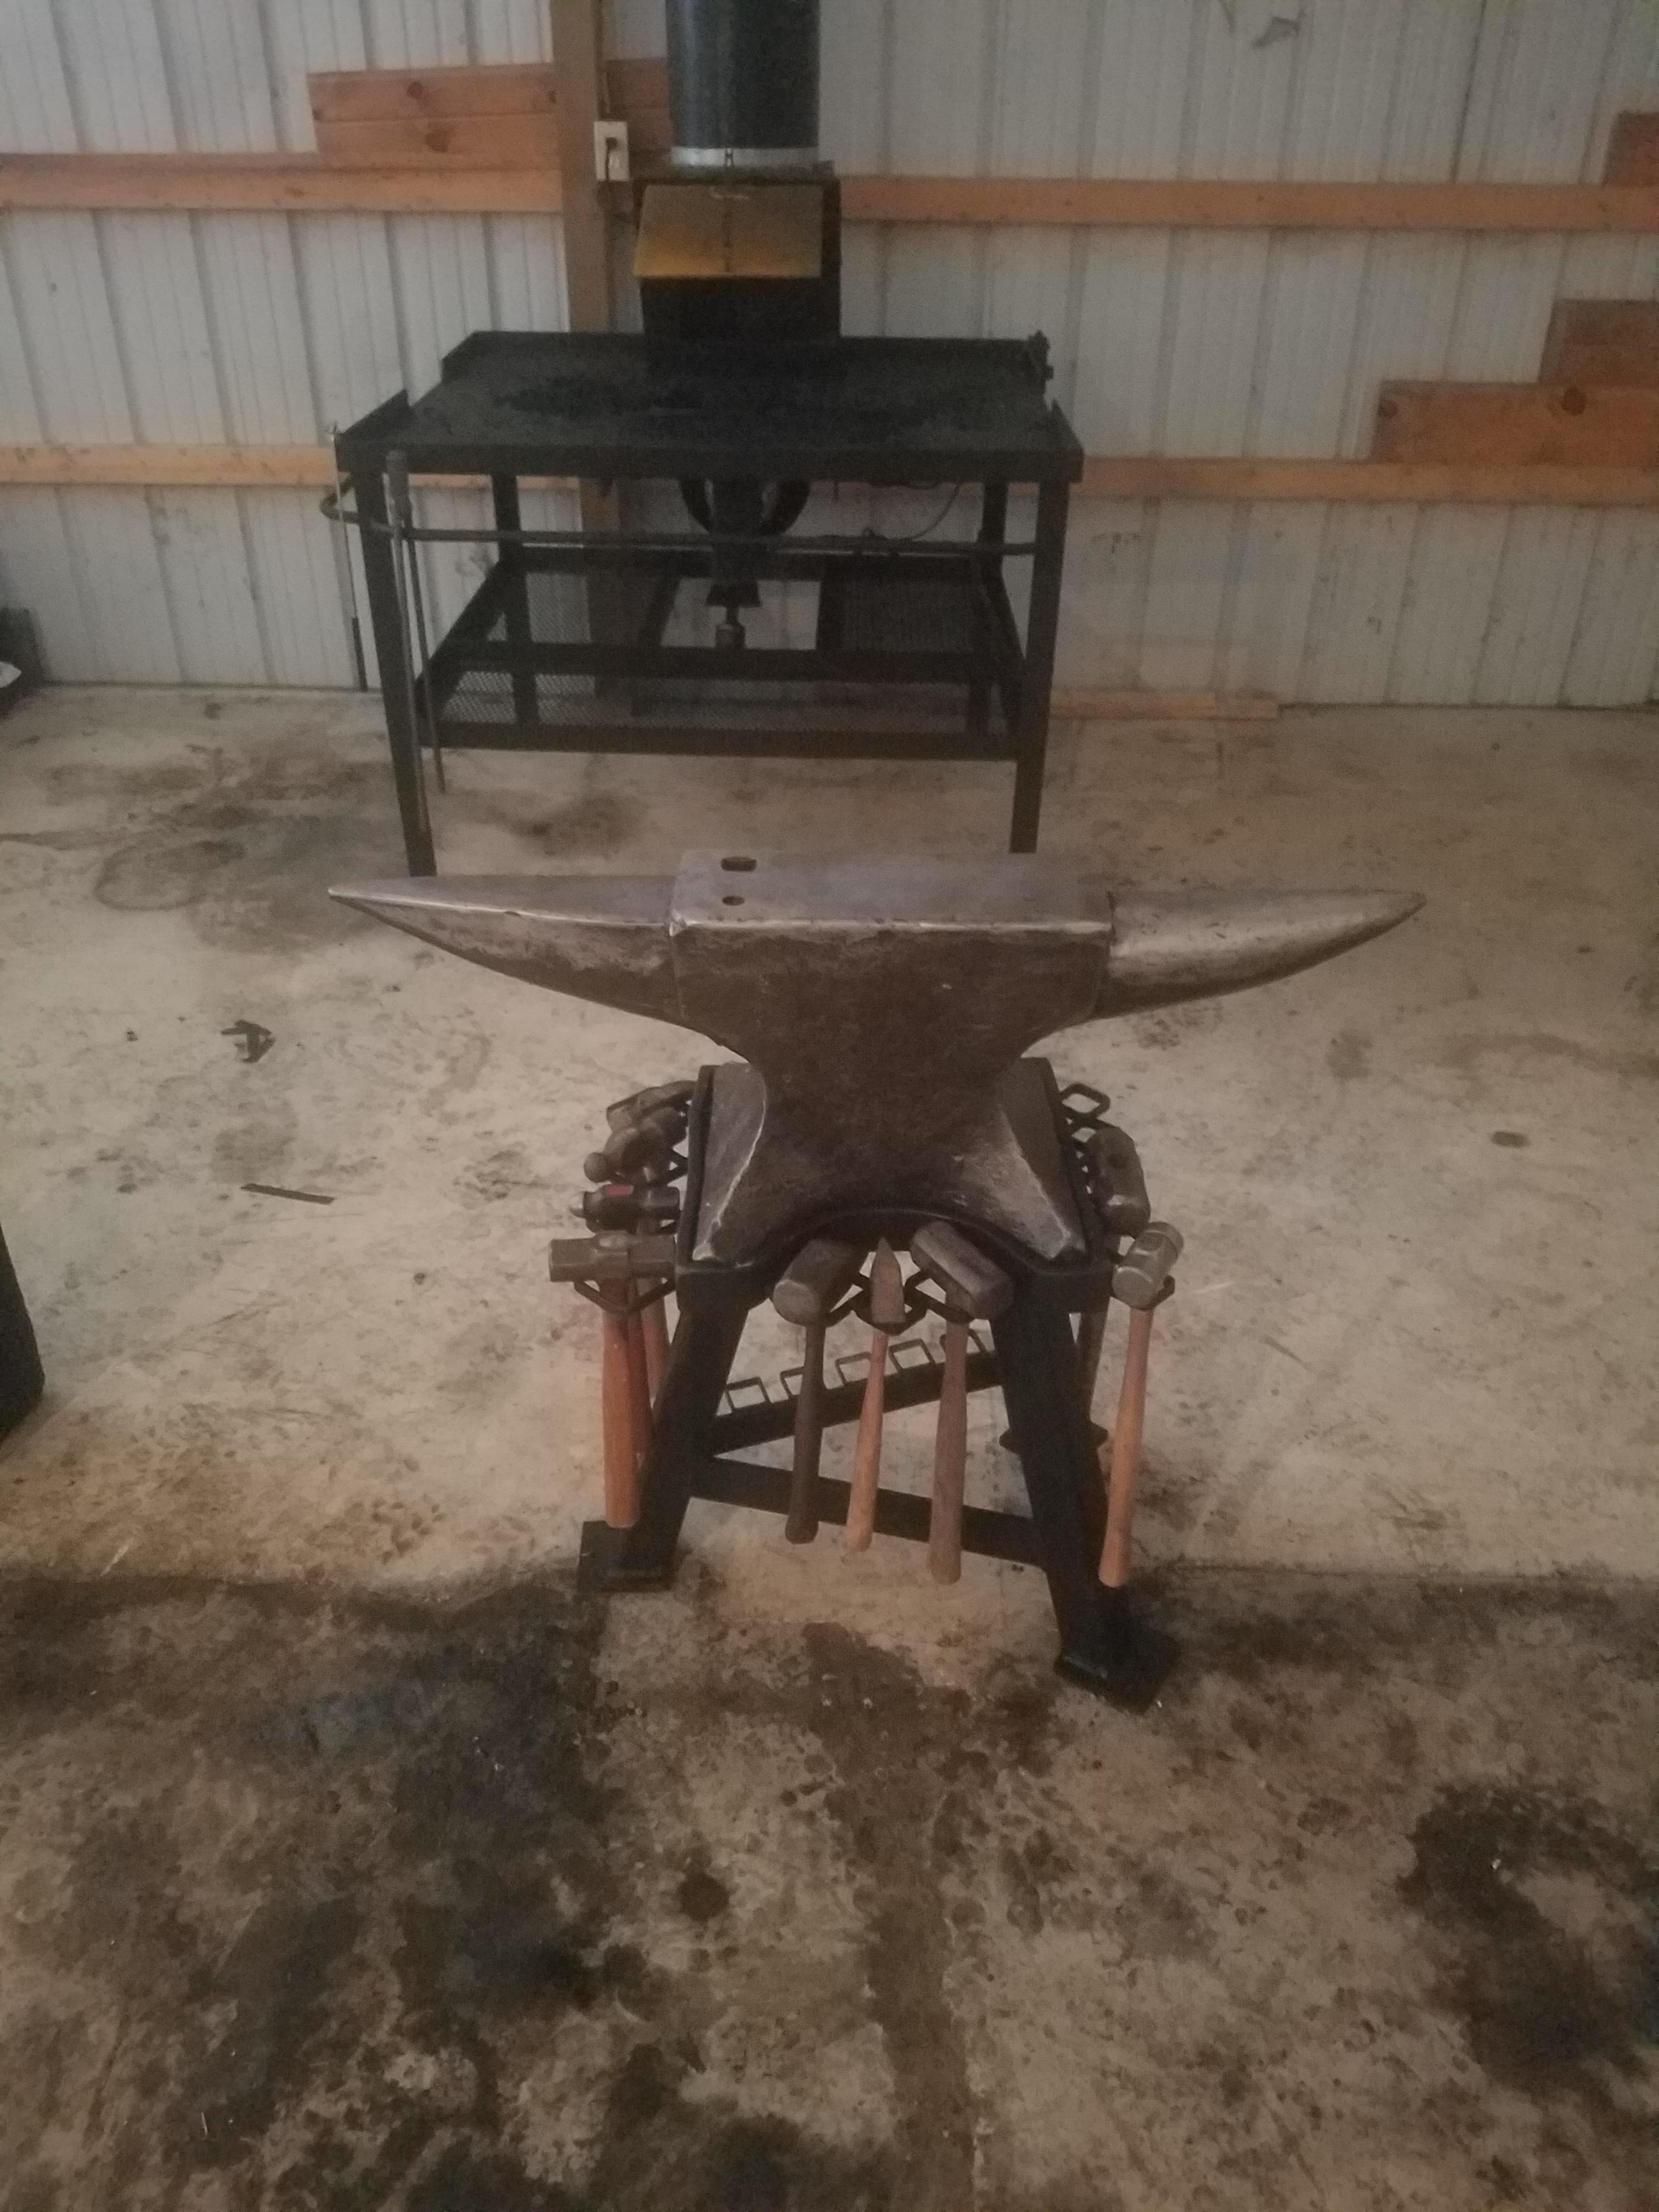 Refined Redux - Used some 4x6's to make an anvil stand for